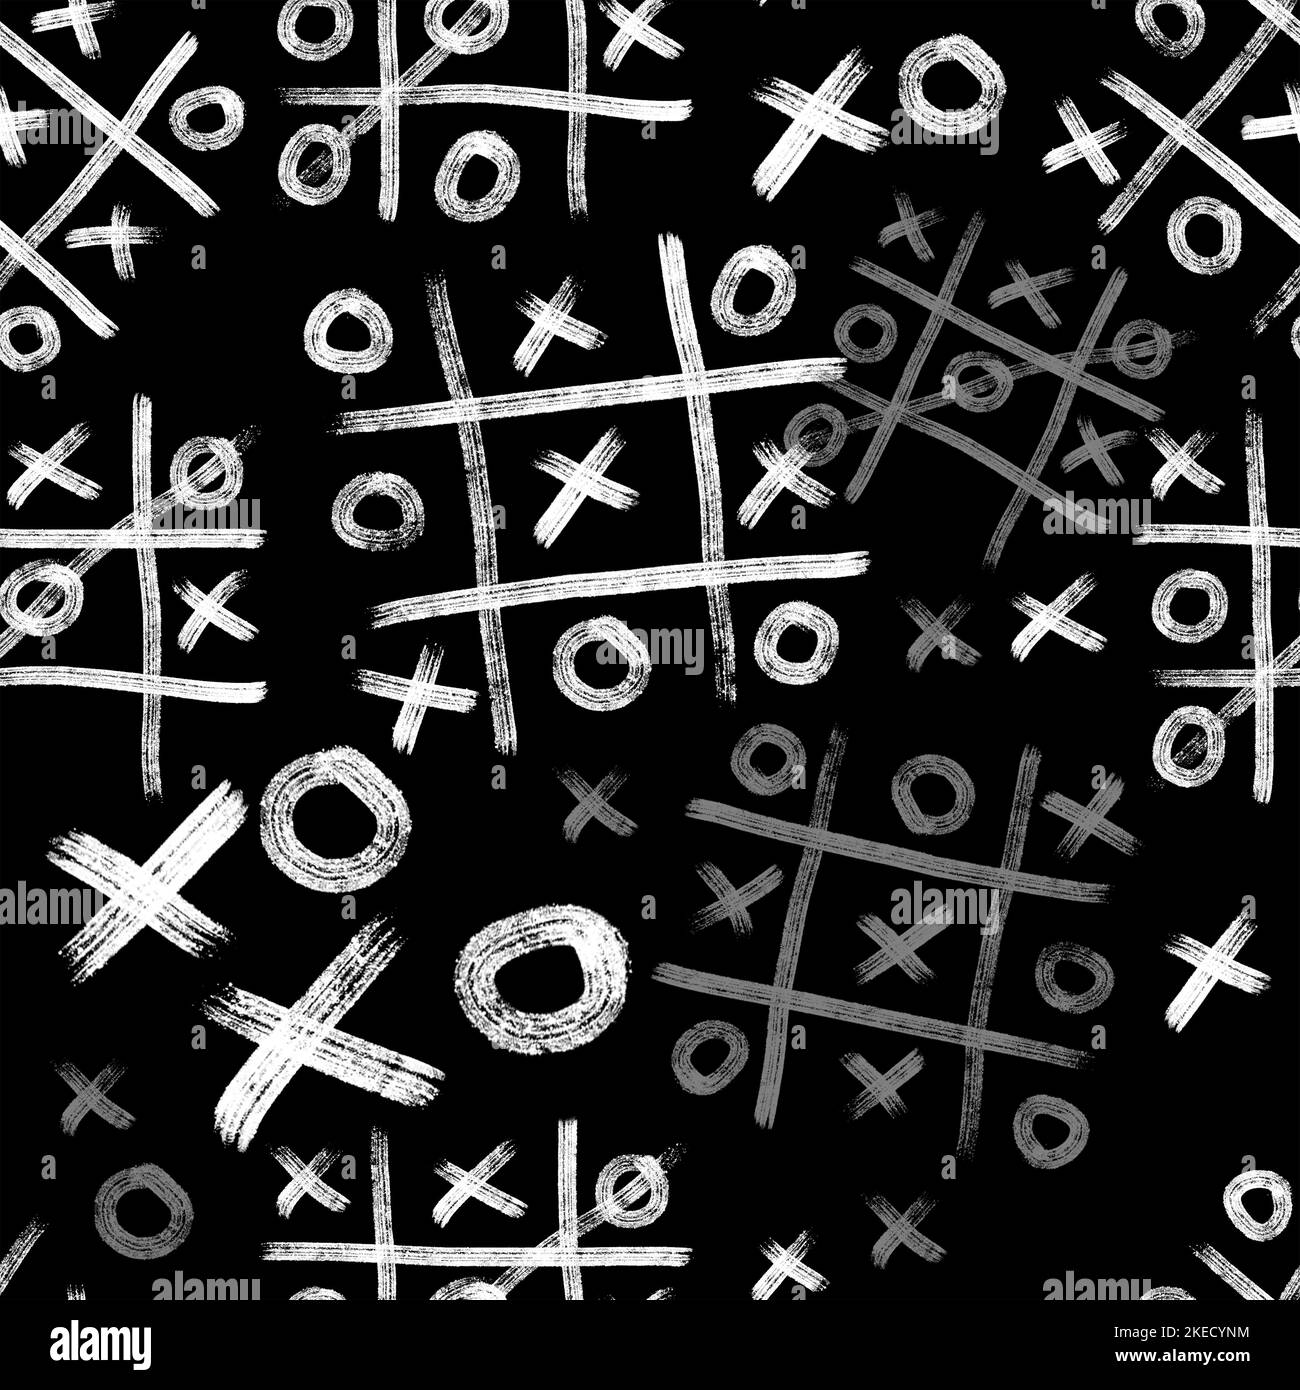 Seamless pattern with doodles on blackboard. Noughts and crosses game, tic-tac-toe. Stock Photo